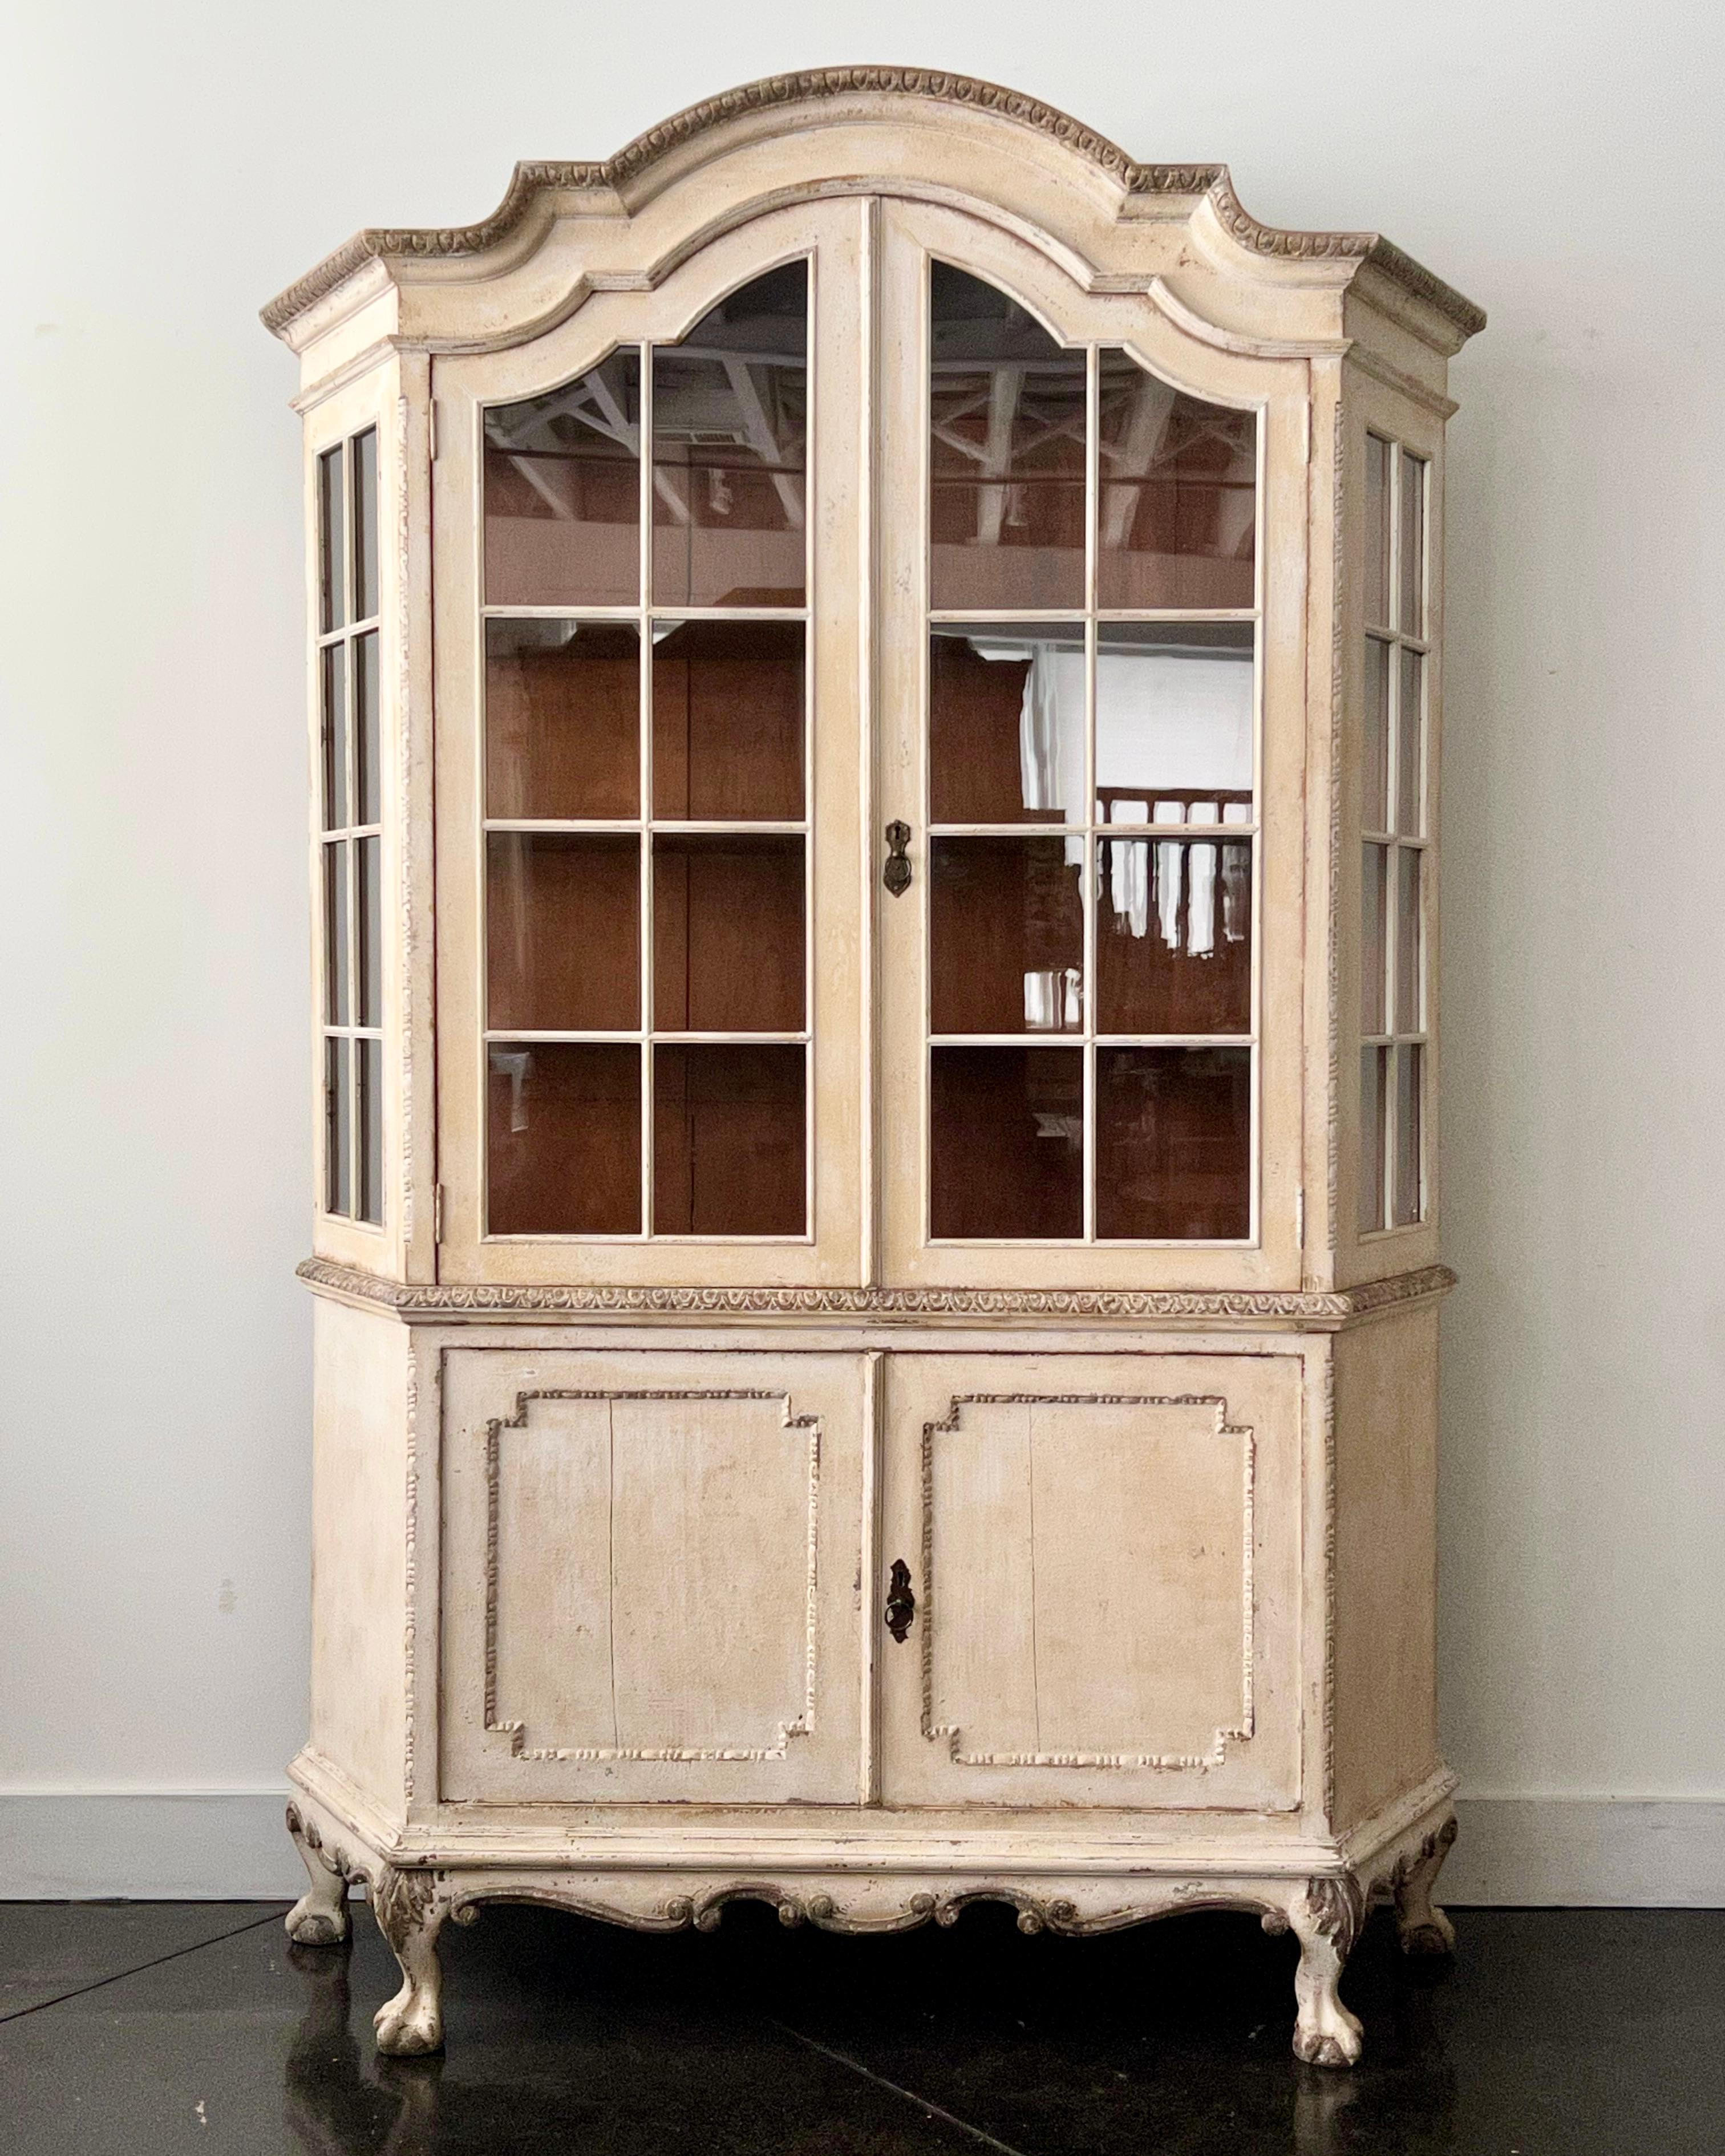 The 19th century glass-fronted bookcase /display cabinet of the Louis XV manner in painted walnut wood with a Chapeau de Gendarme crown. 
 Double glass doors open to give access to the shelved interior, the three shelves visible through the panes